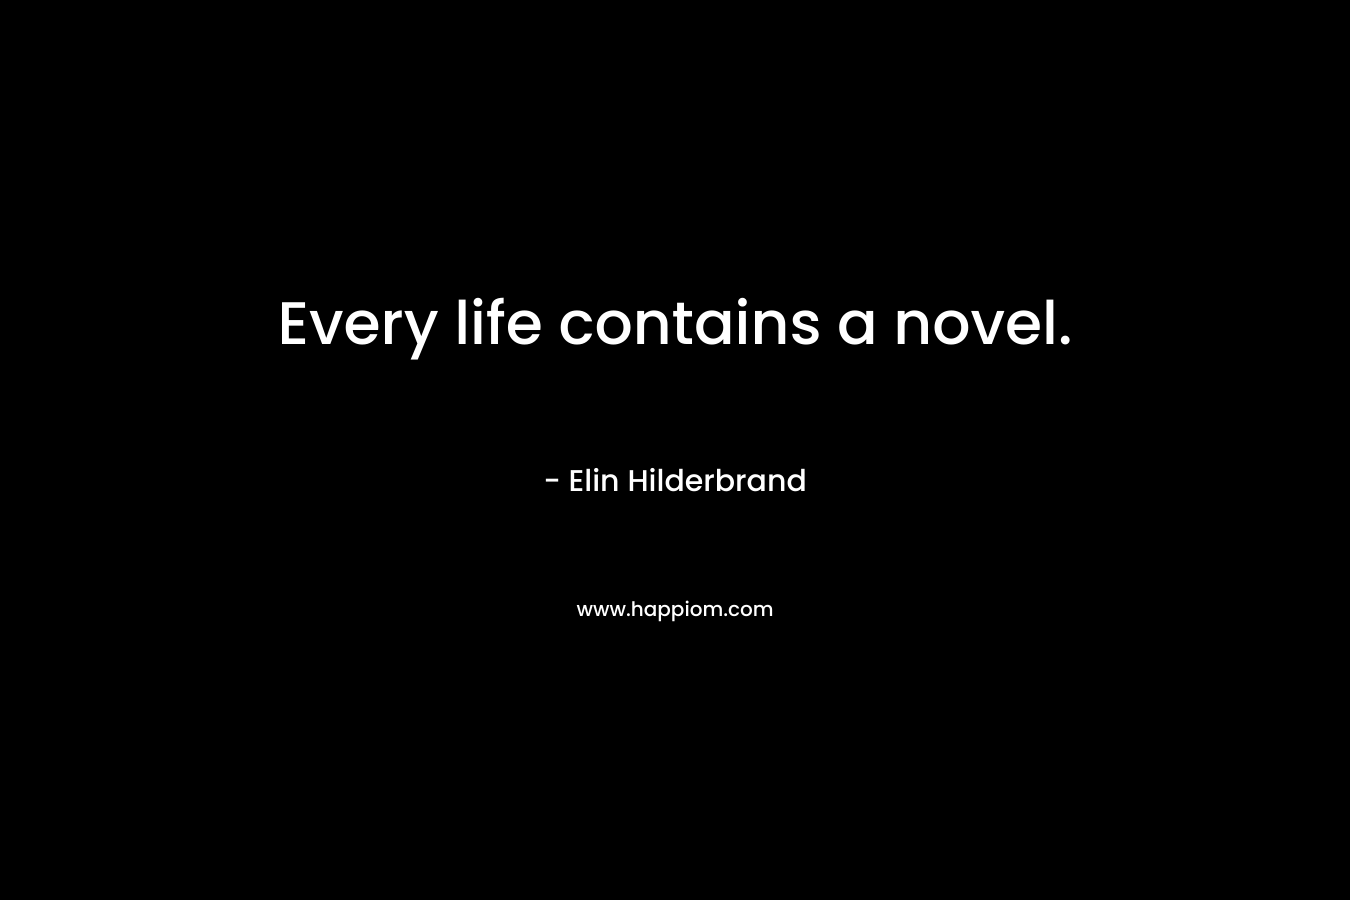 Every life contains a novel.